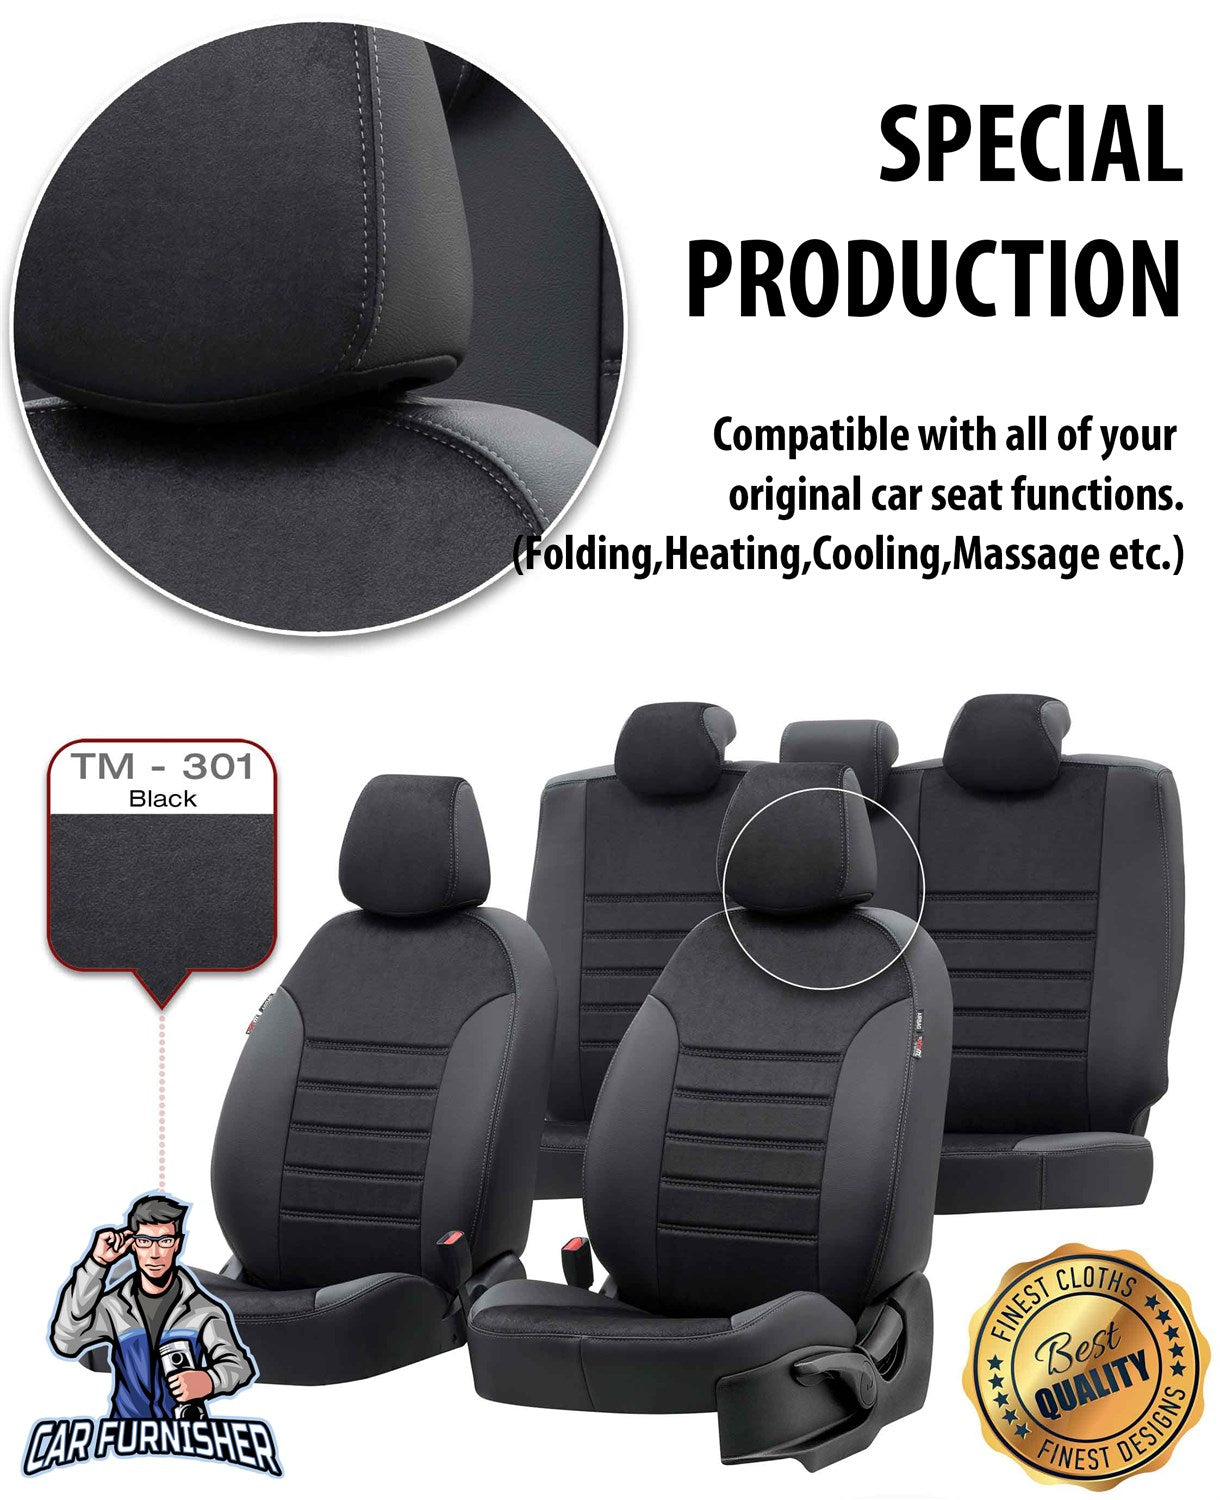 Peugeot 508 Seat Covers Milano Suede Design Smoked Black Leather & Suede Fabric